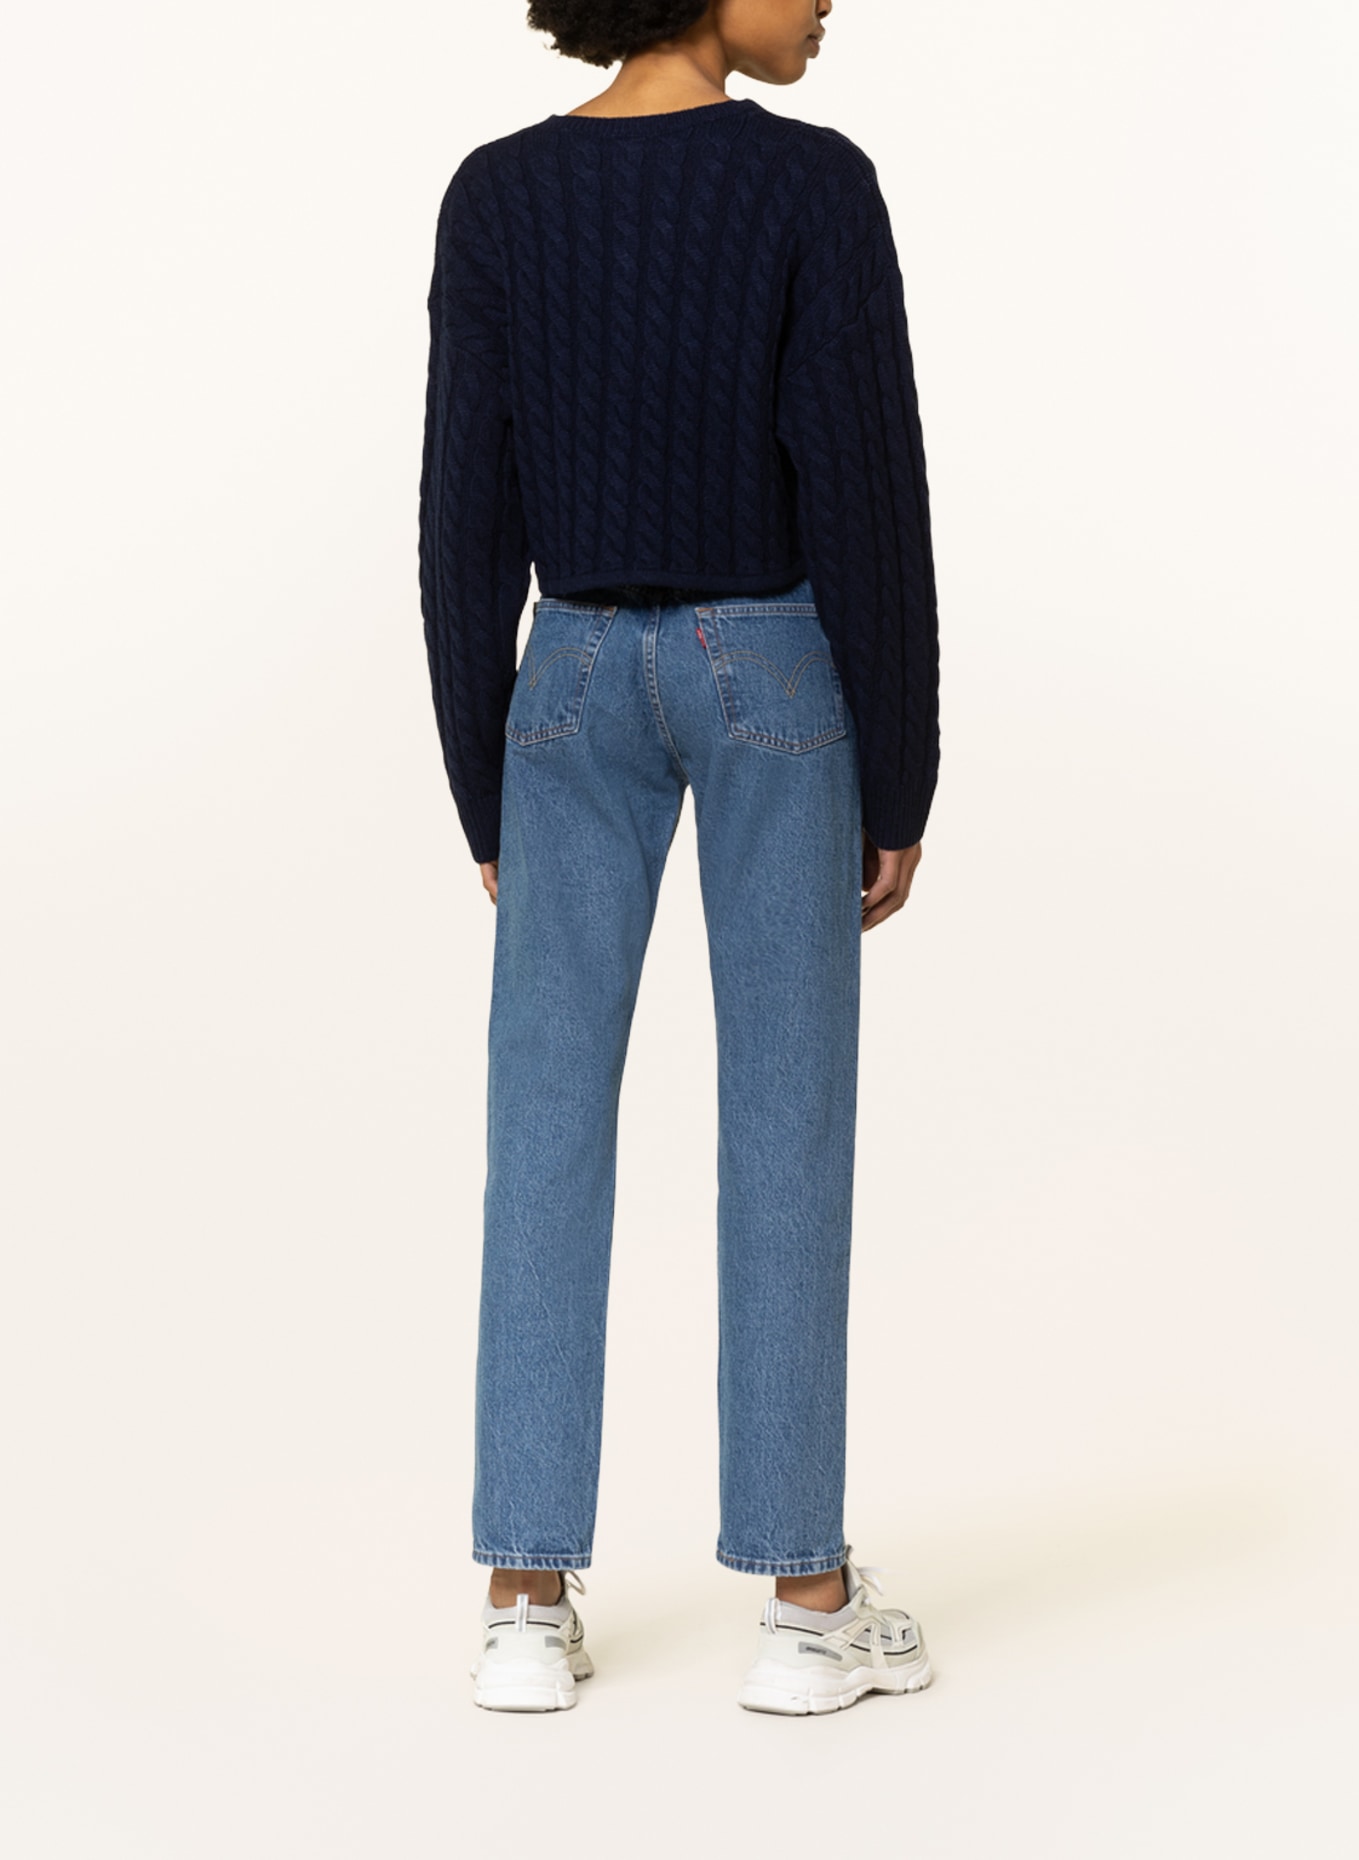 Levi's® Cropped sweater, Color: DARK BLUE (Image 3)